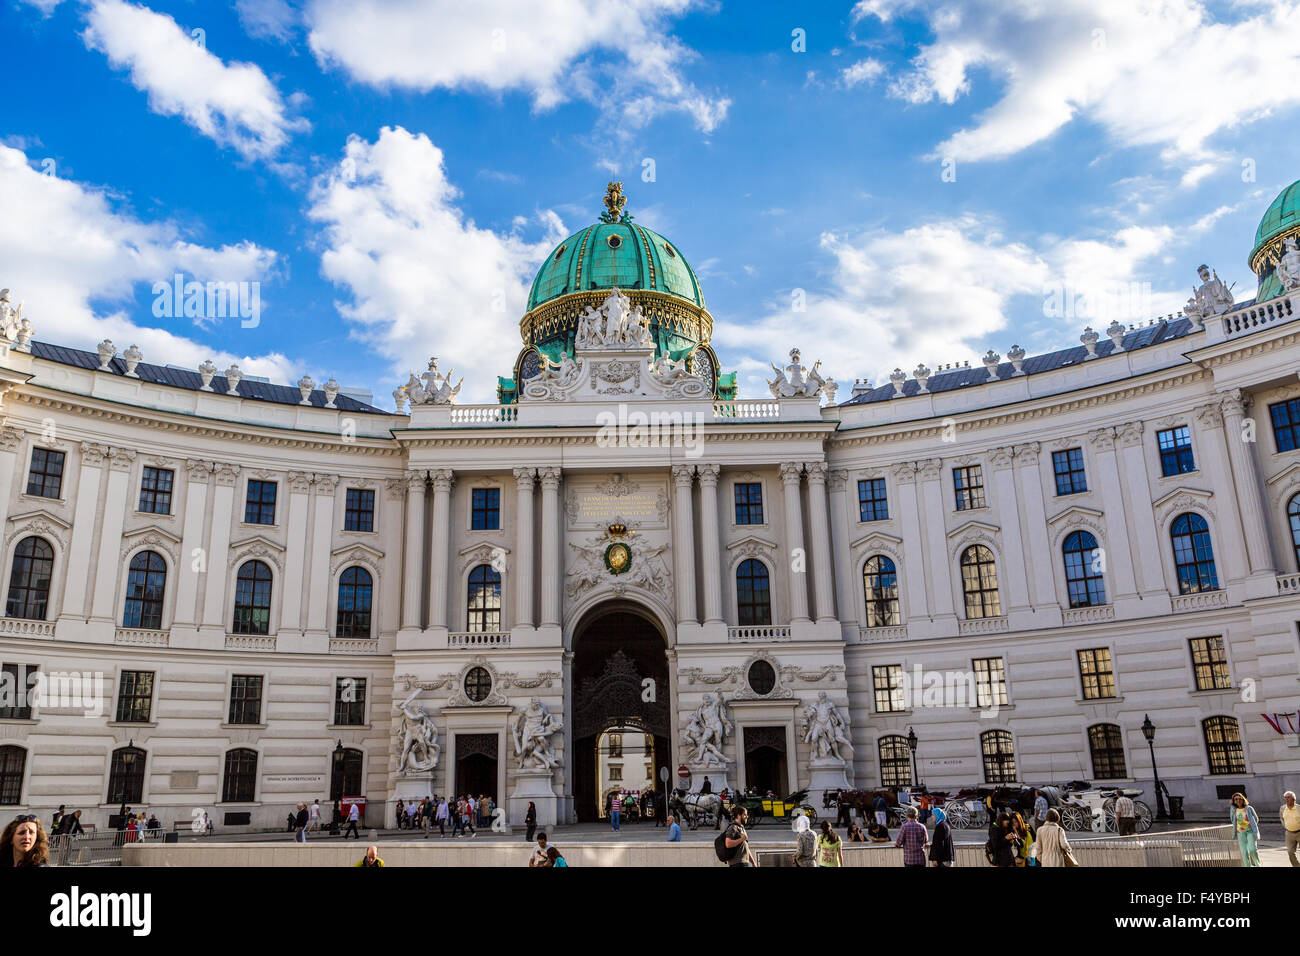 VIENNA, AUSTRIA - 14 MARCH, 2013: Famous Hofburg Palace in Vienna on 14 March 2013. It was the Habsburgs' principal winter resid Stock Photo